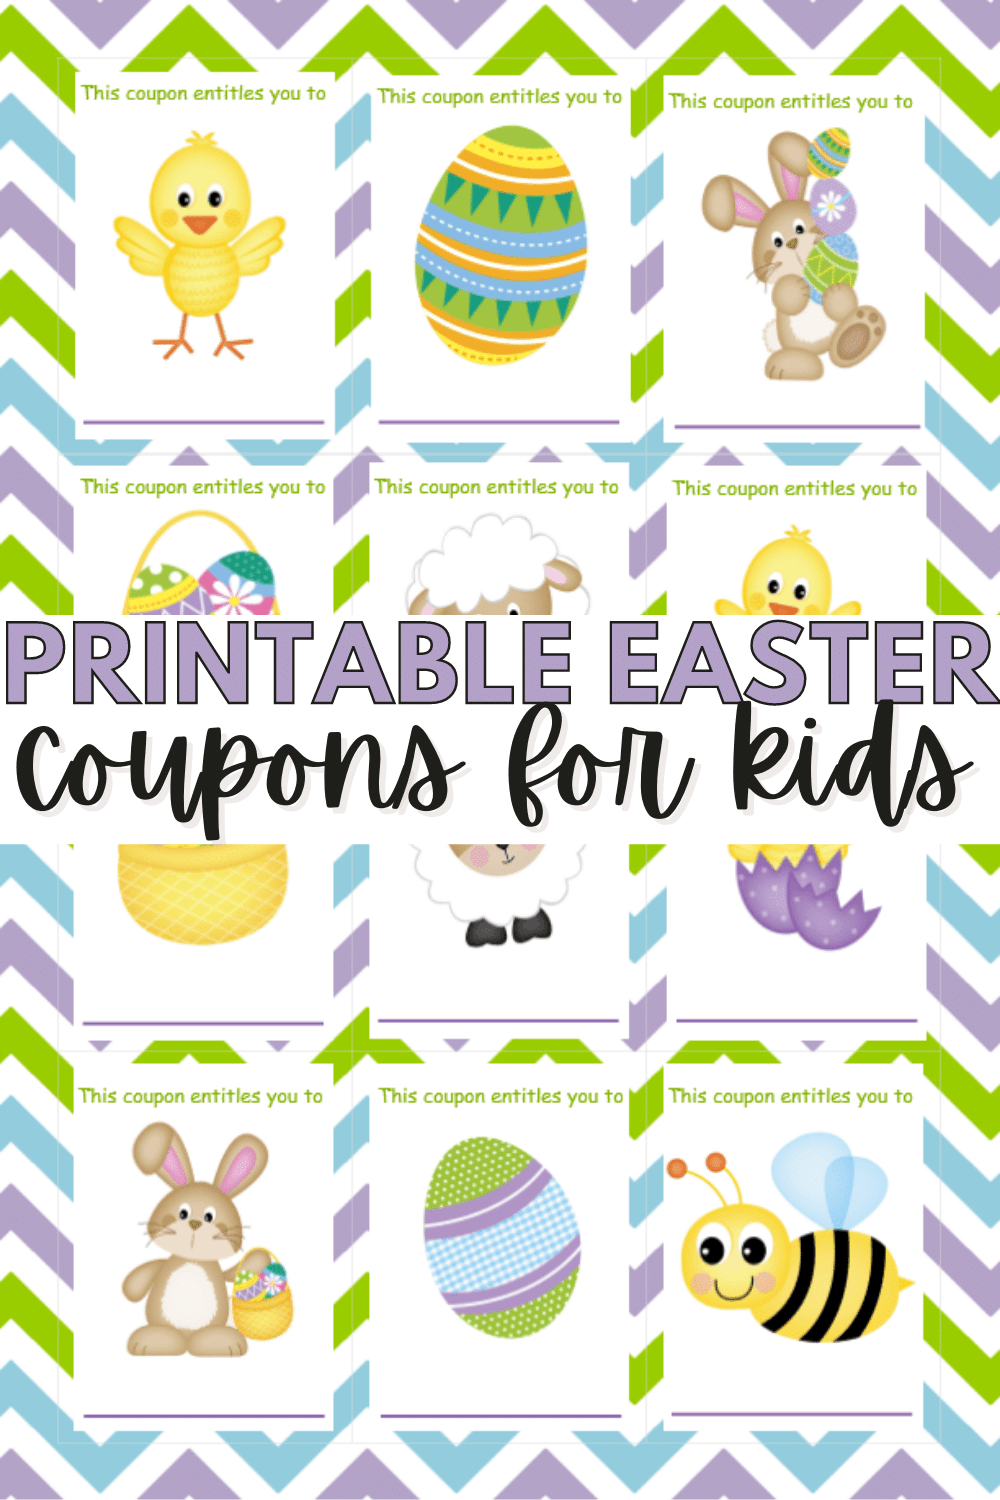 These colorful, printable Easter coupons for kids make a great, non-candy Easter basket filler that doesn't cost a dime and kids love! #printables #freeprintables #eastercoupons #coupons #kidprintables via @wondermomwannab